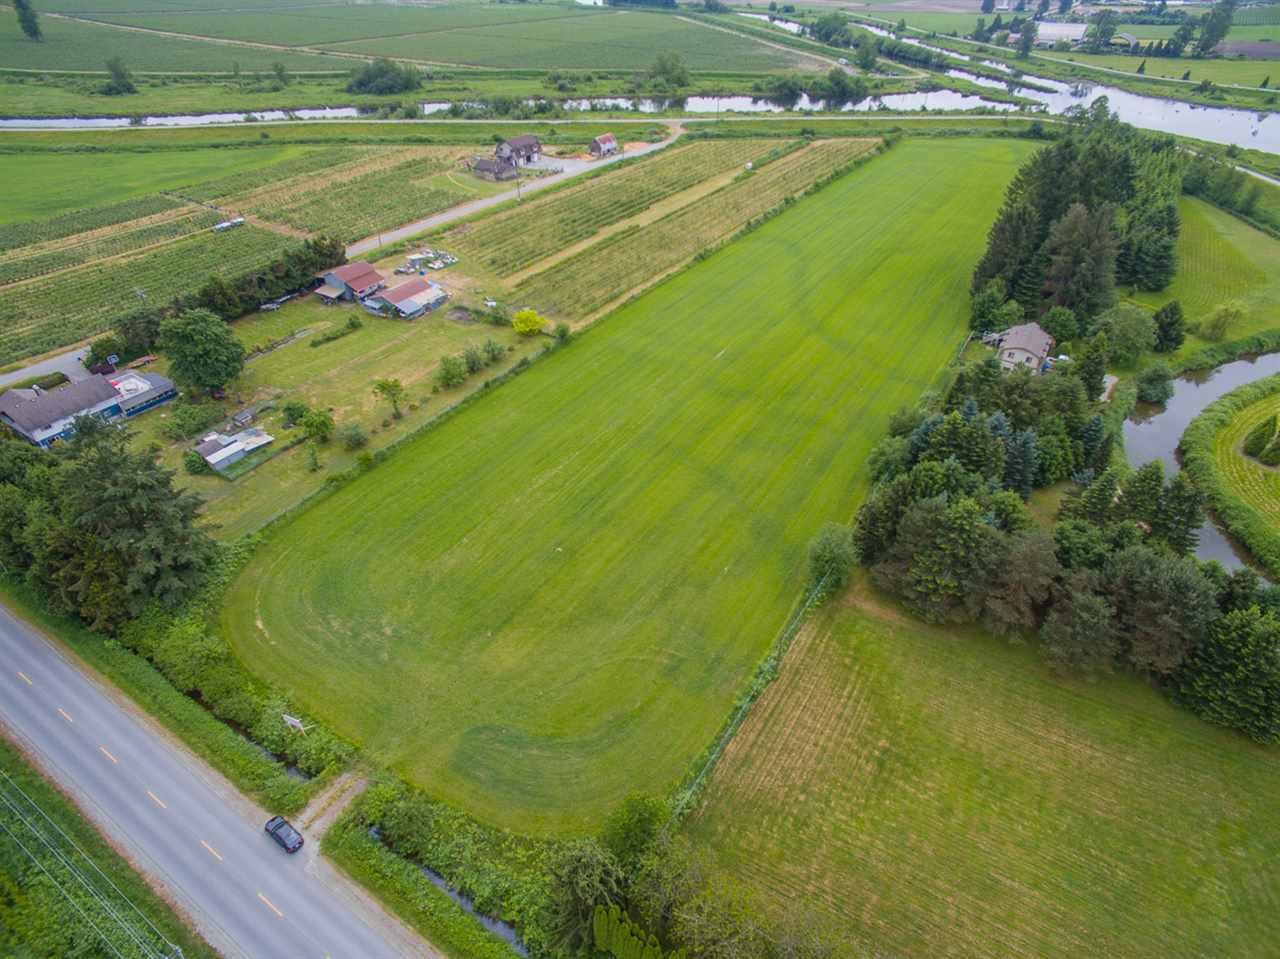 Main Photo: 19970 MCNEIL Road in Pitt Meadows: North Meadows PI Land for sale : MLS®# R2141120